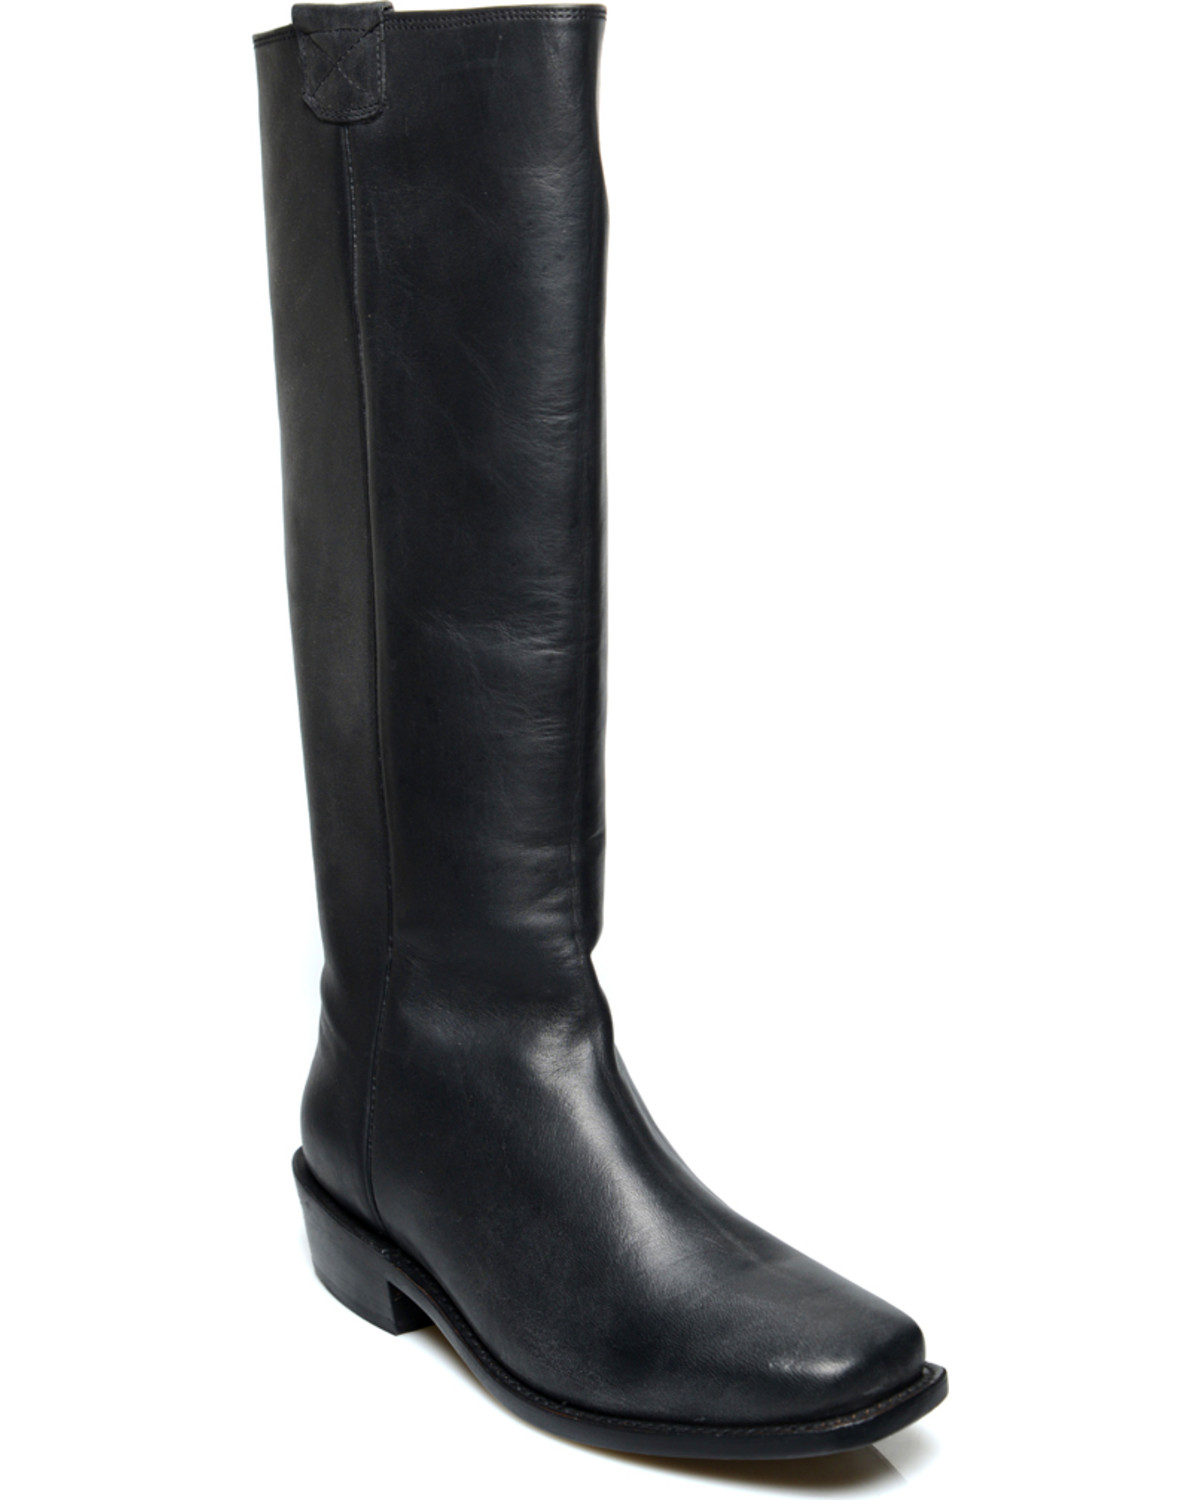 black pull on boots womens